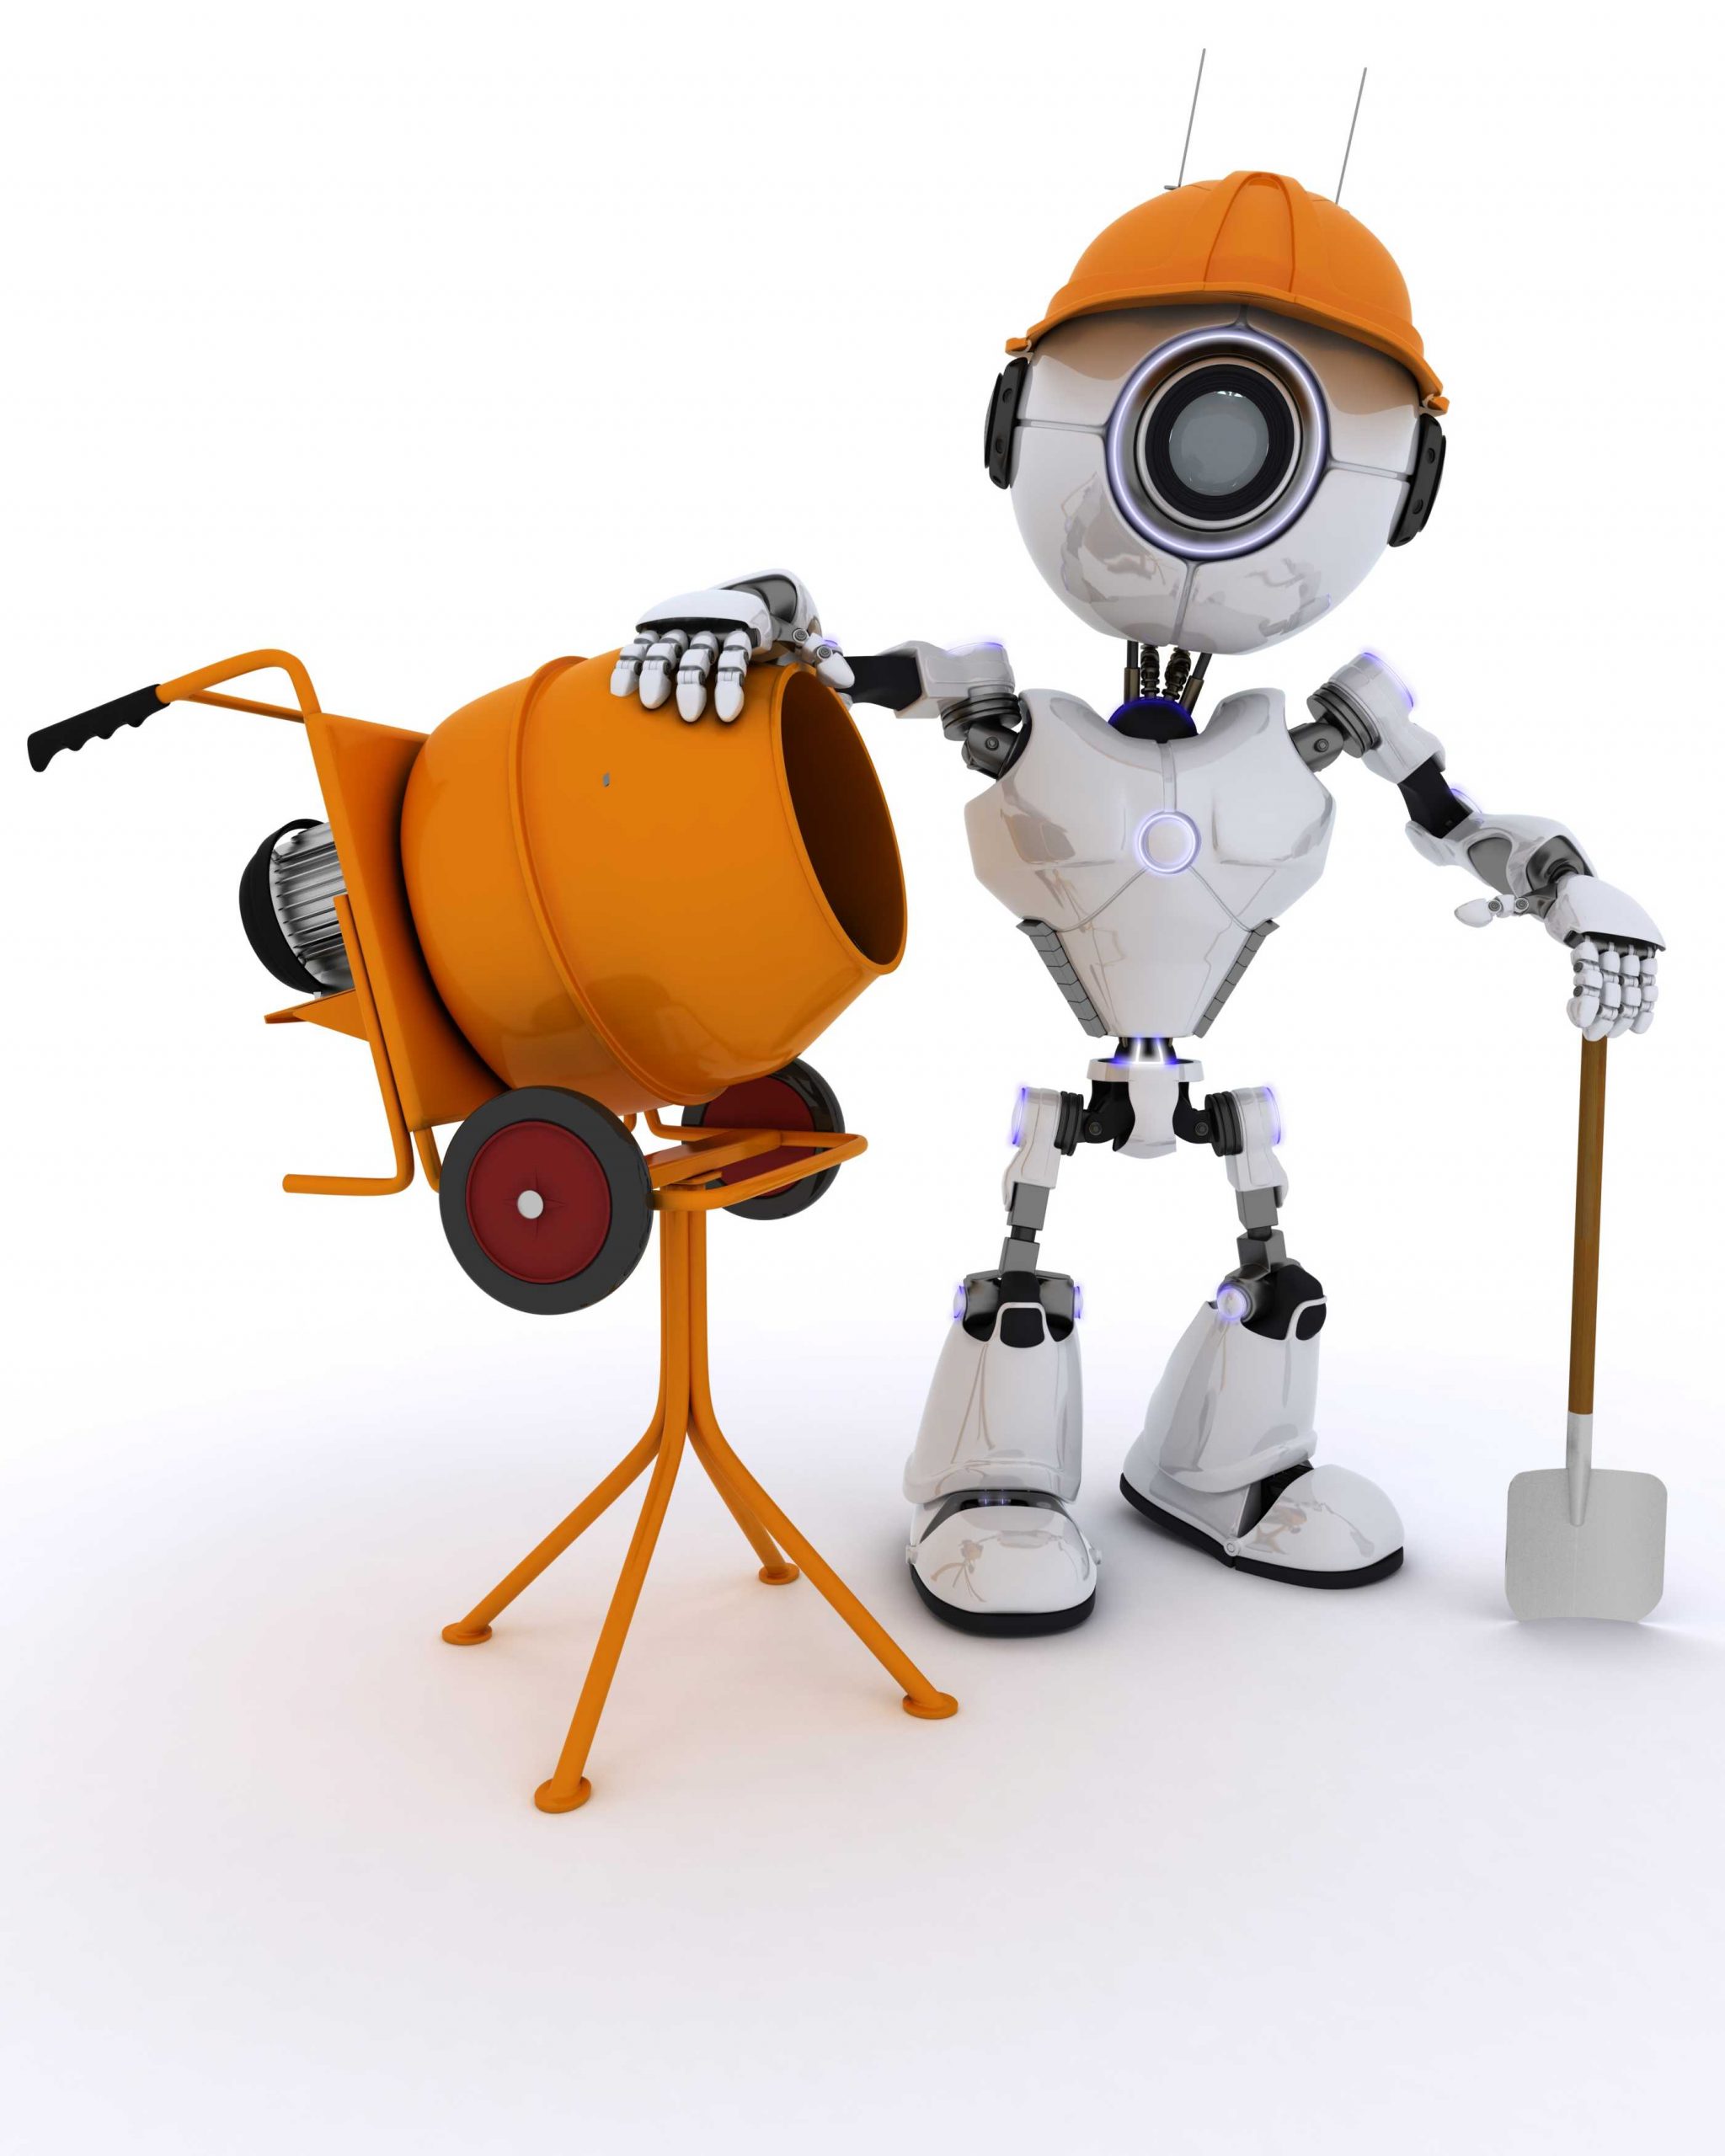 Construction Robot Market to Hit USD 2,398.7 Mn by 2032